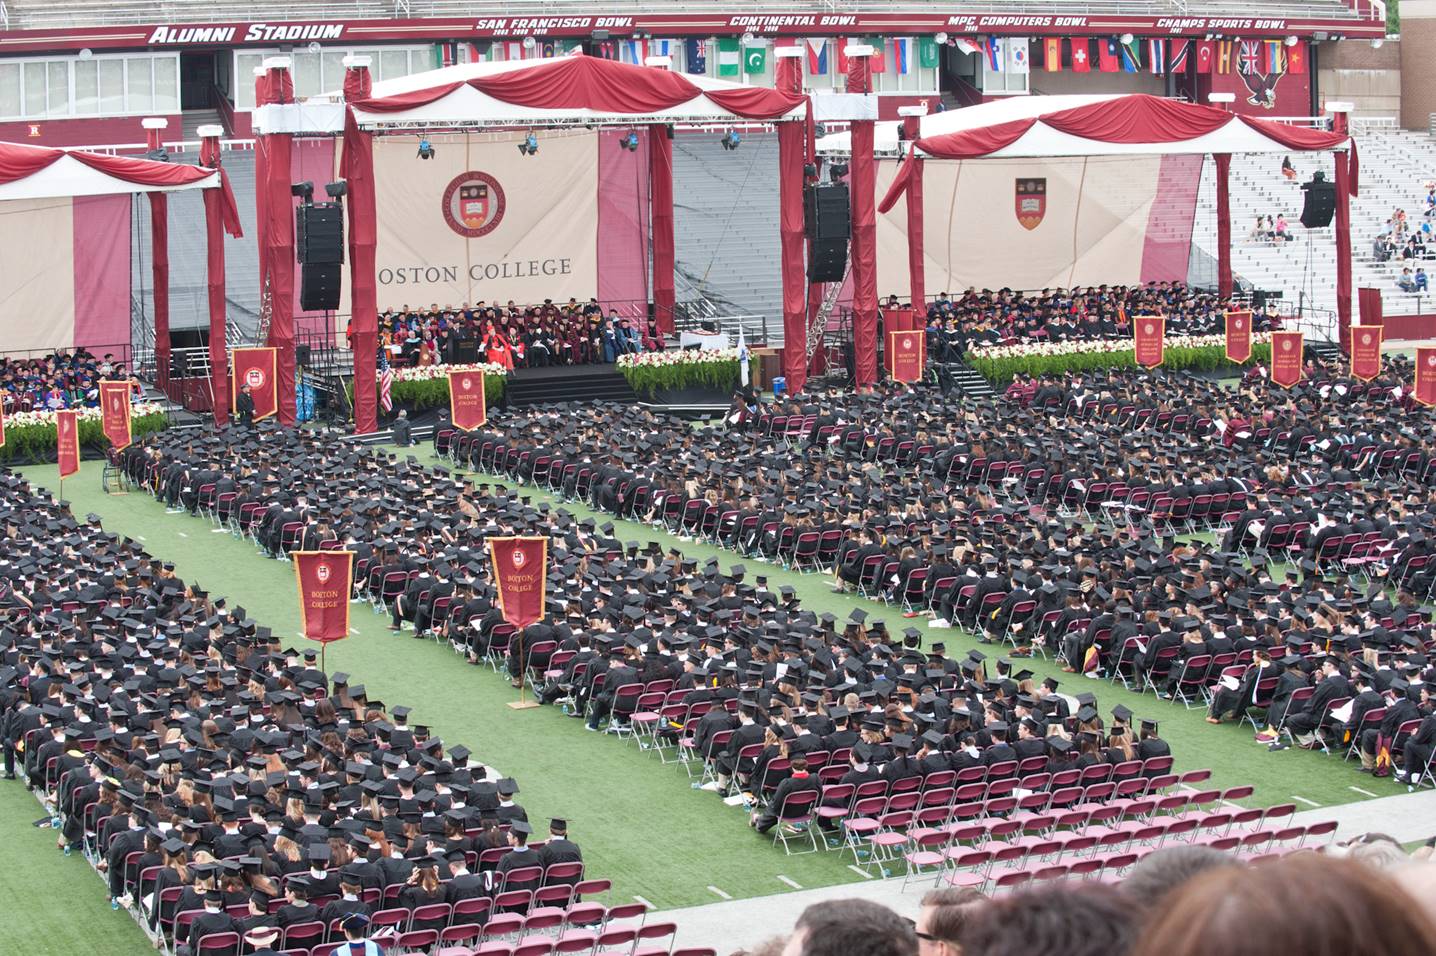 Boston College Custom Commencement Backdrop Banners